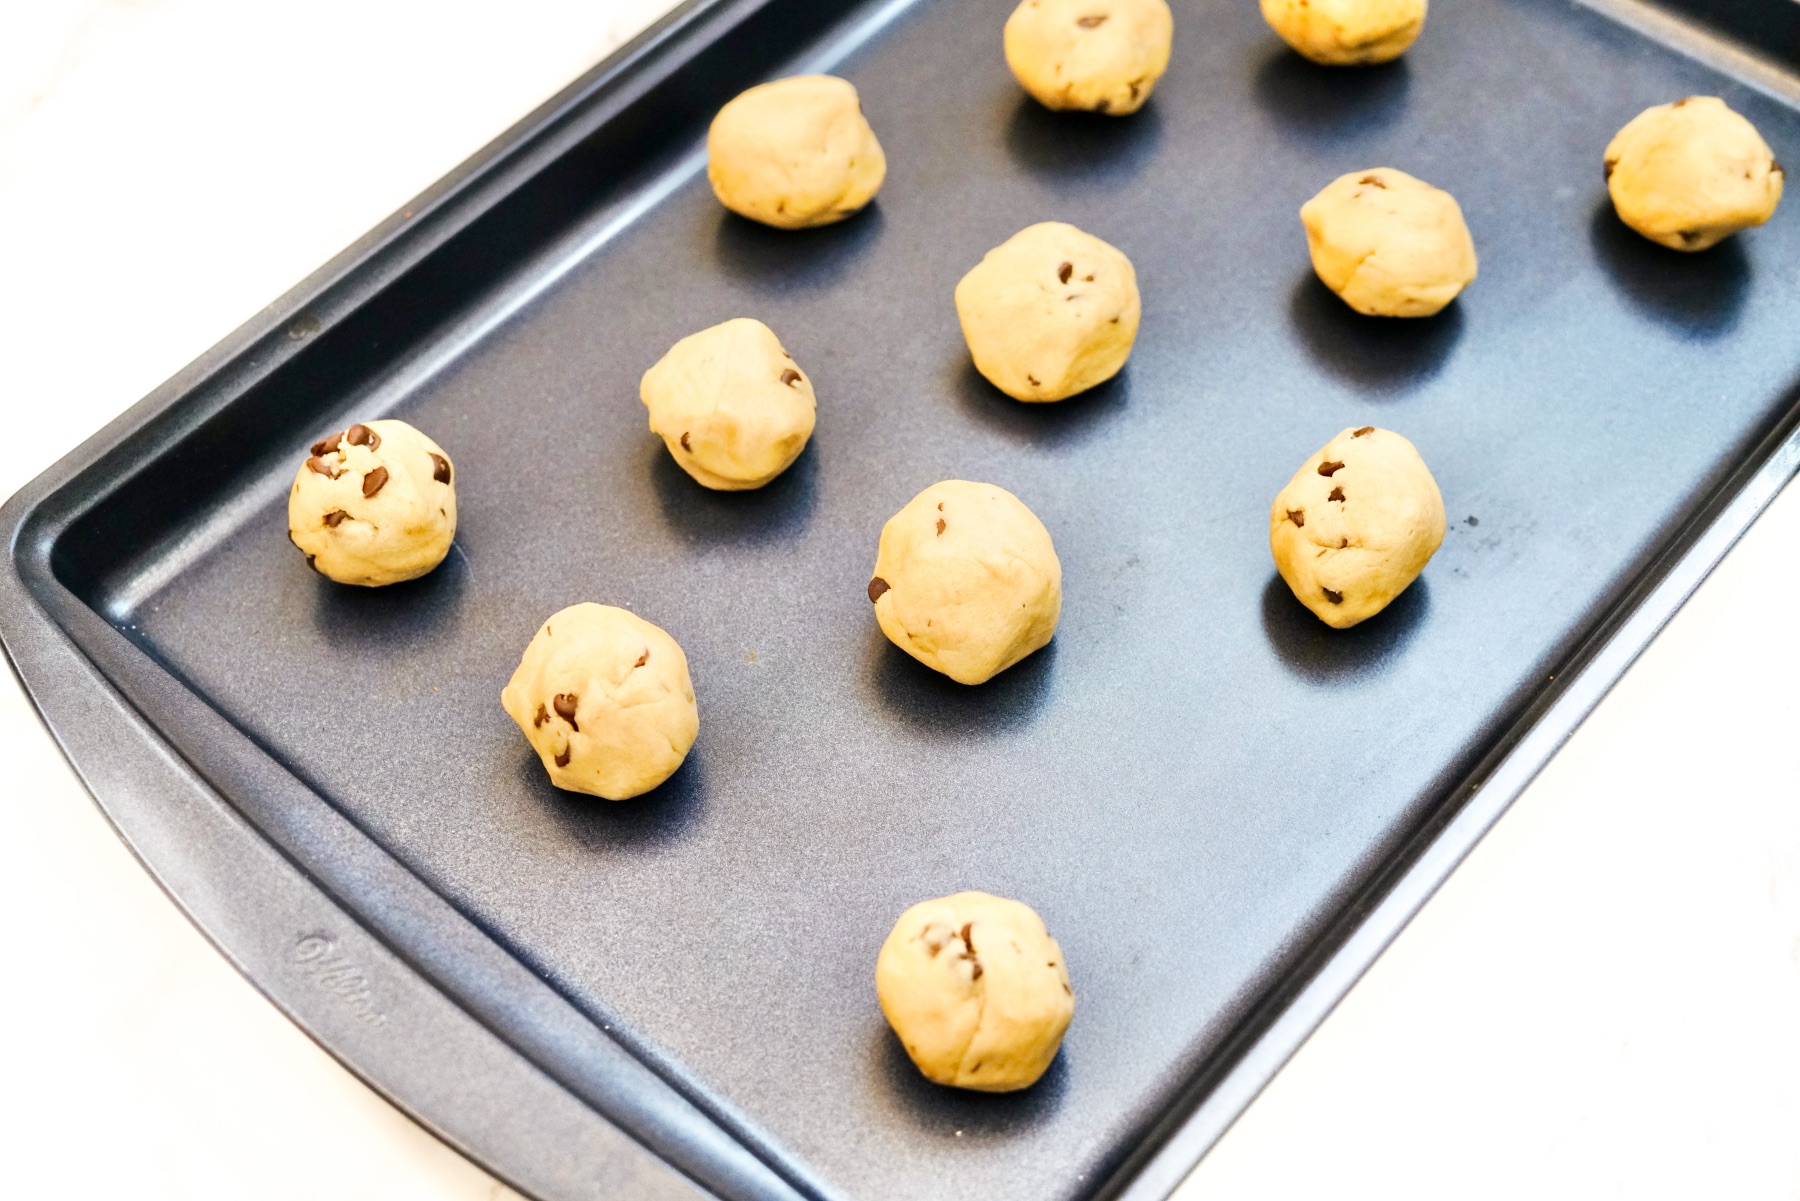 place the dough on a cookie sheet